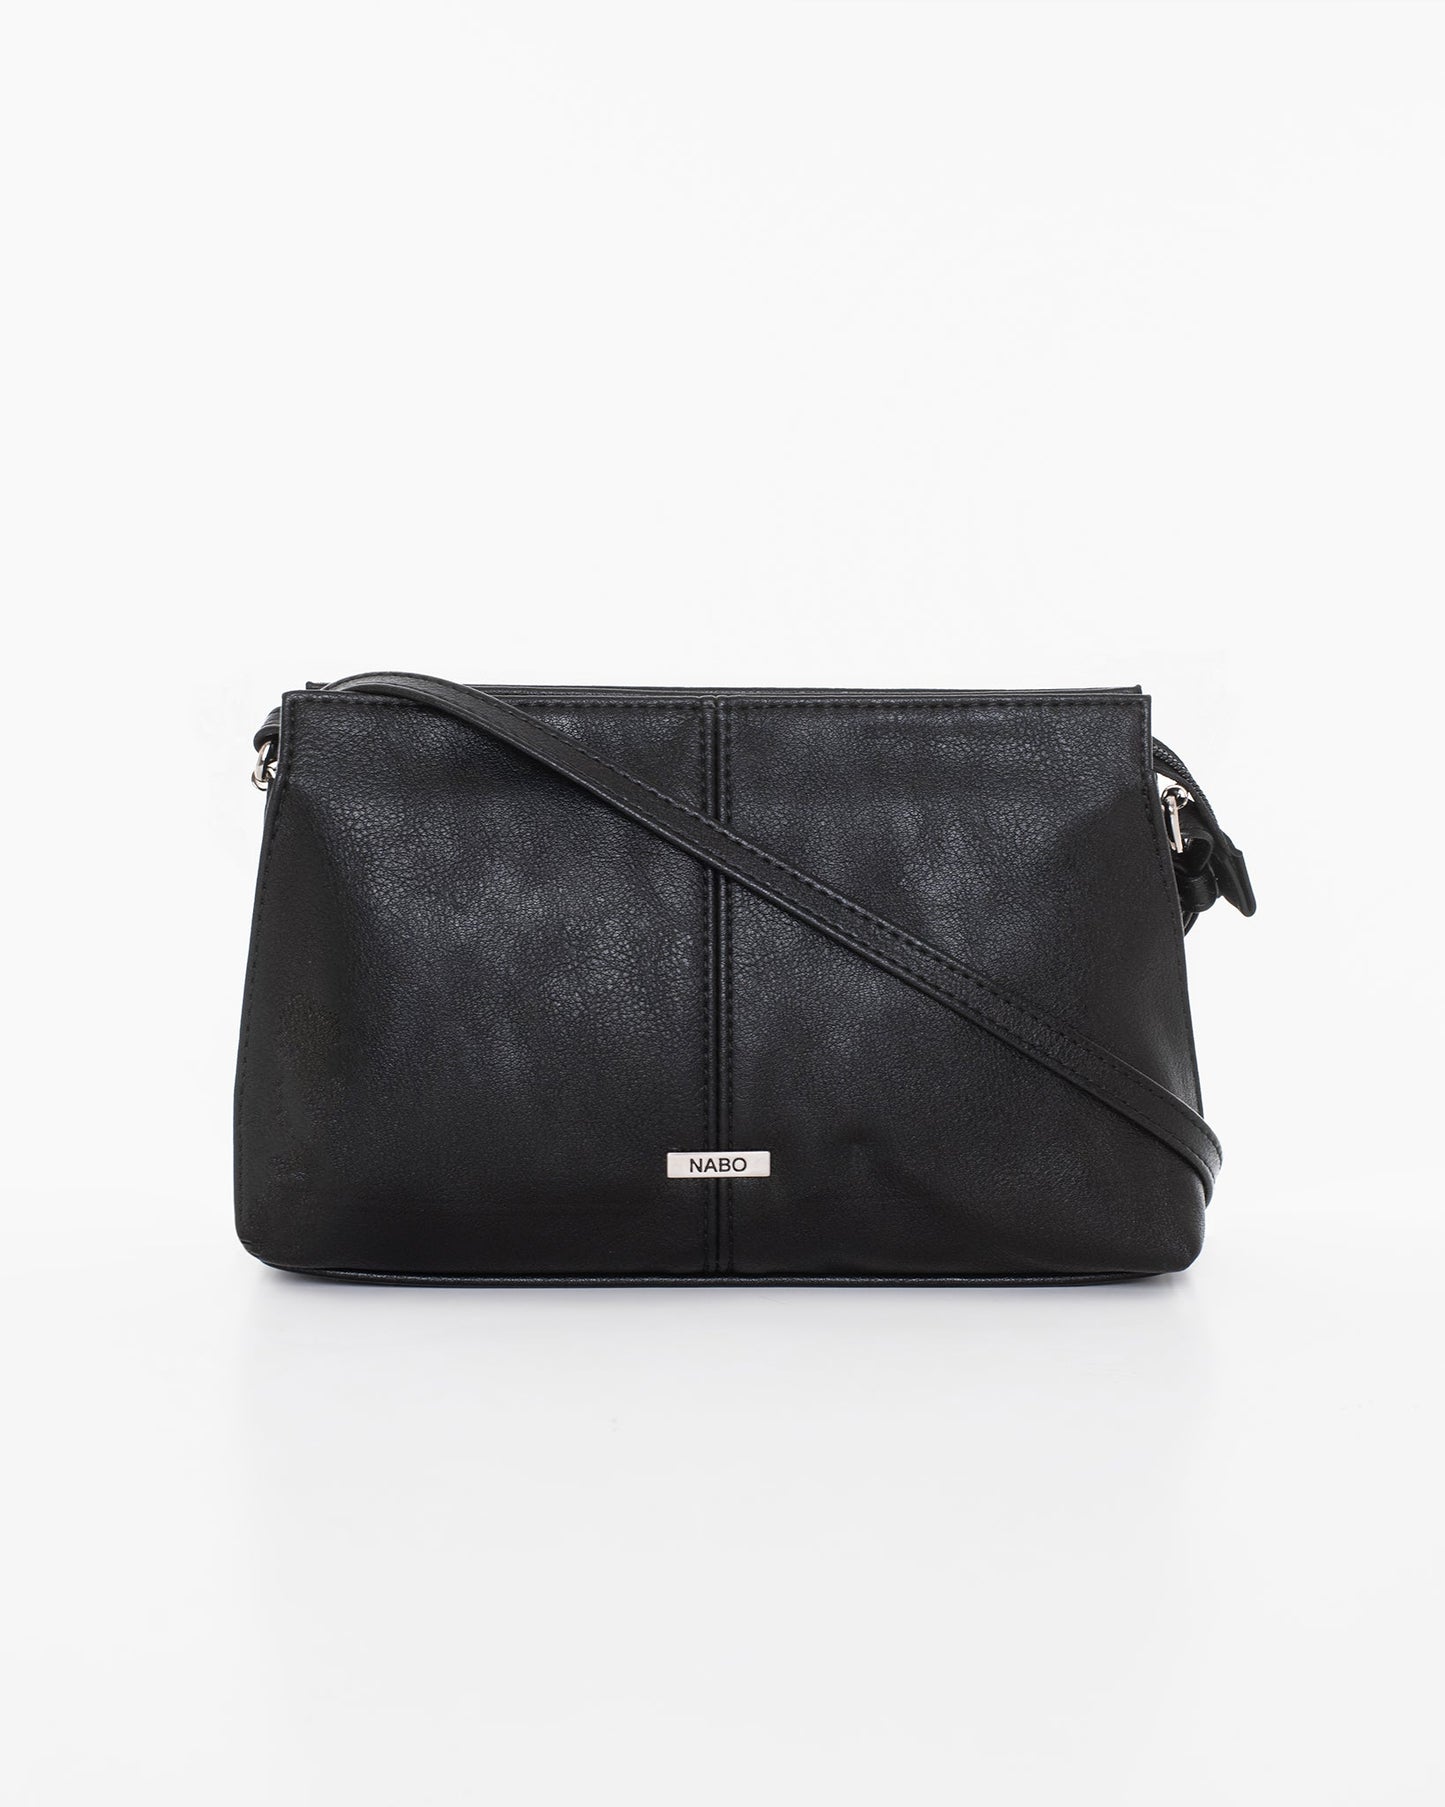 Black leather shoulder bag by Nabo, made in Finland. Features three zippered pockets and an adjustable strap up to 145 cm. Dimensions: 23 x 14 x 7 cm.